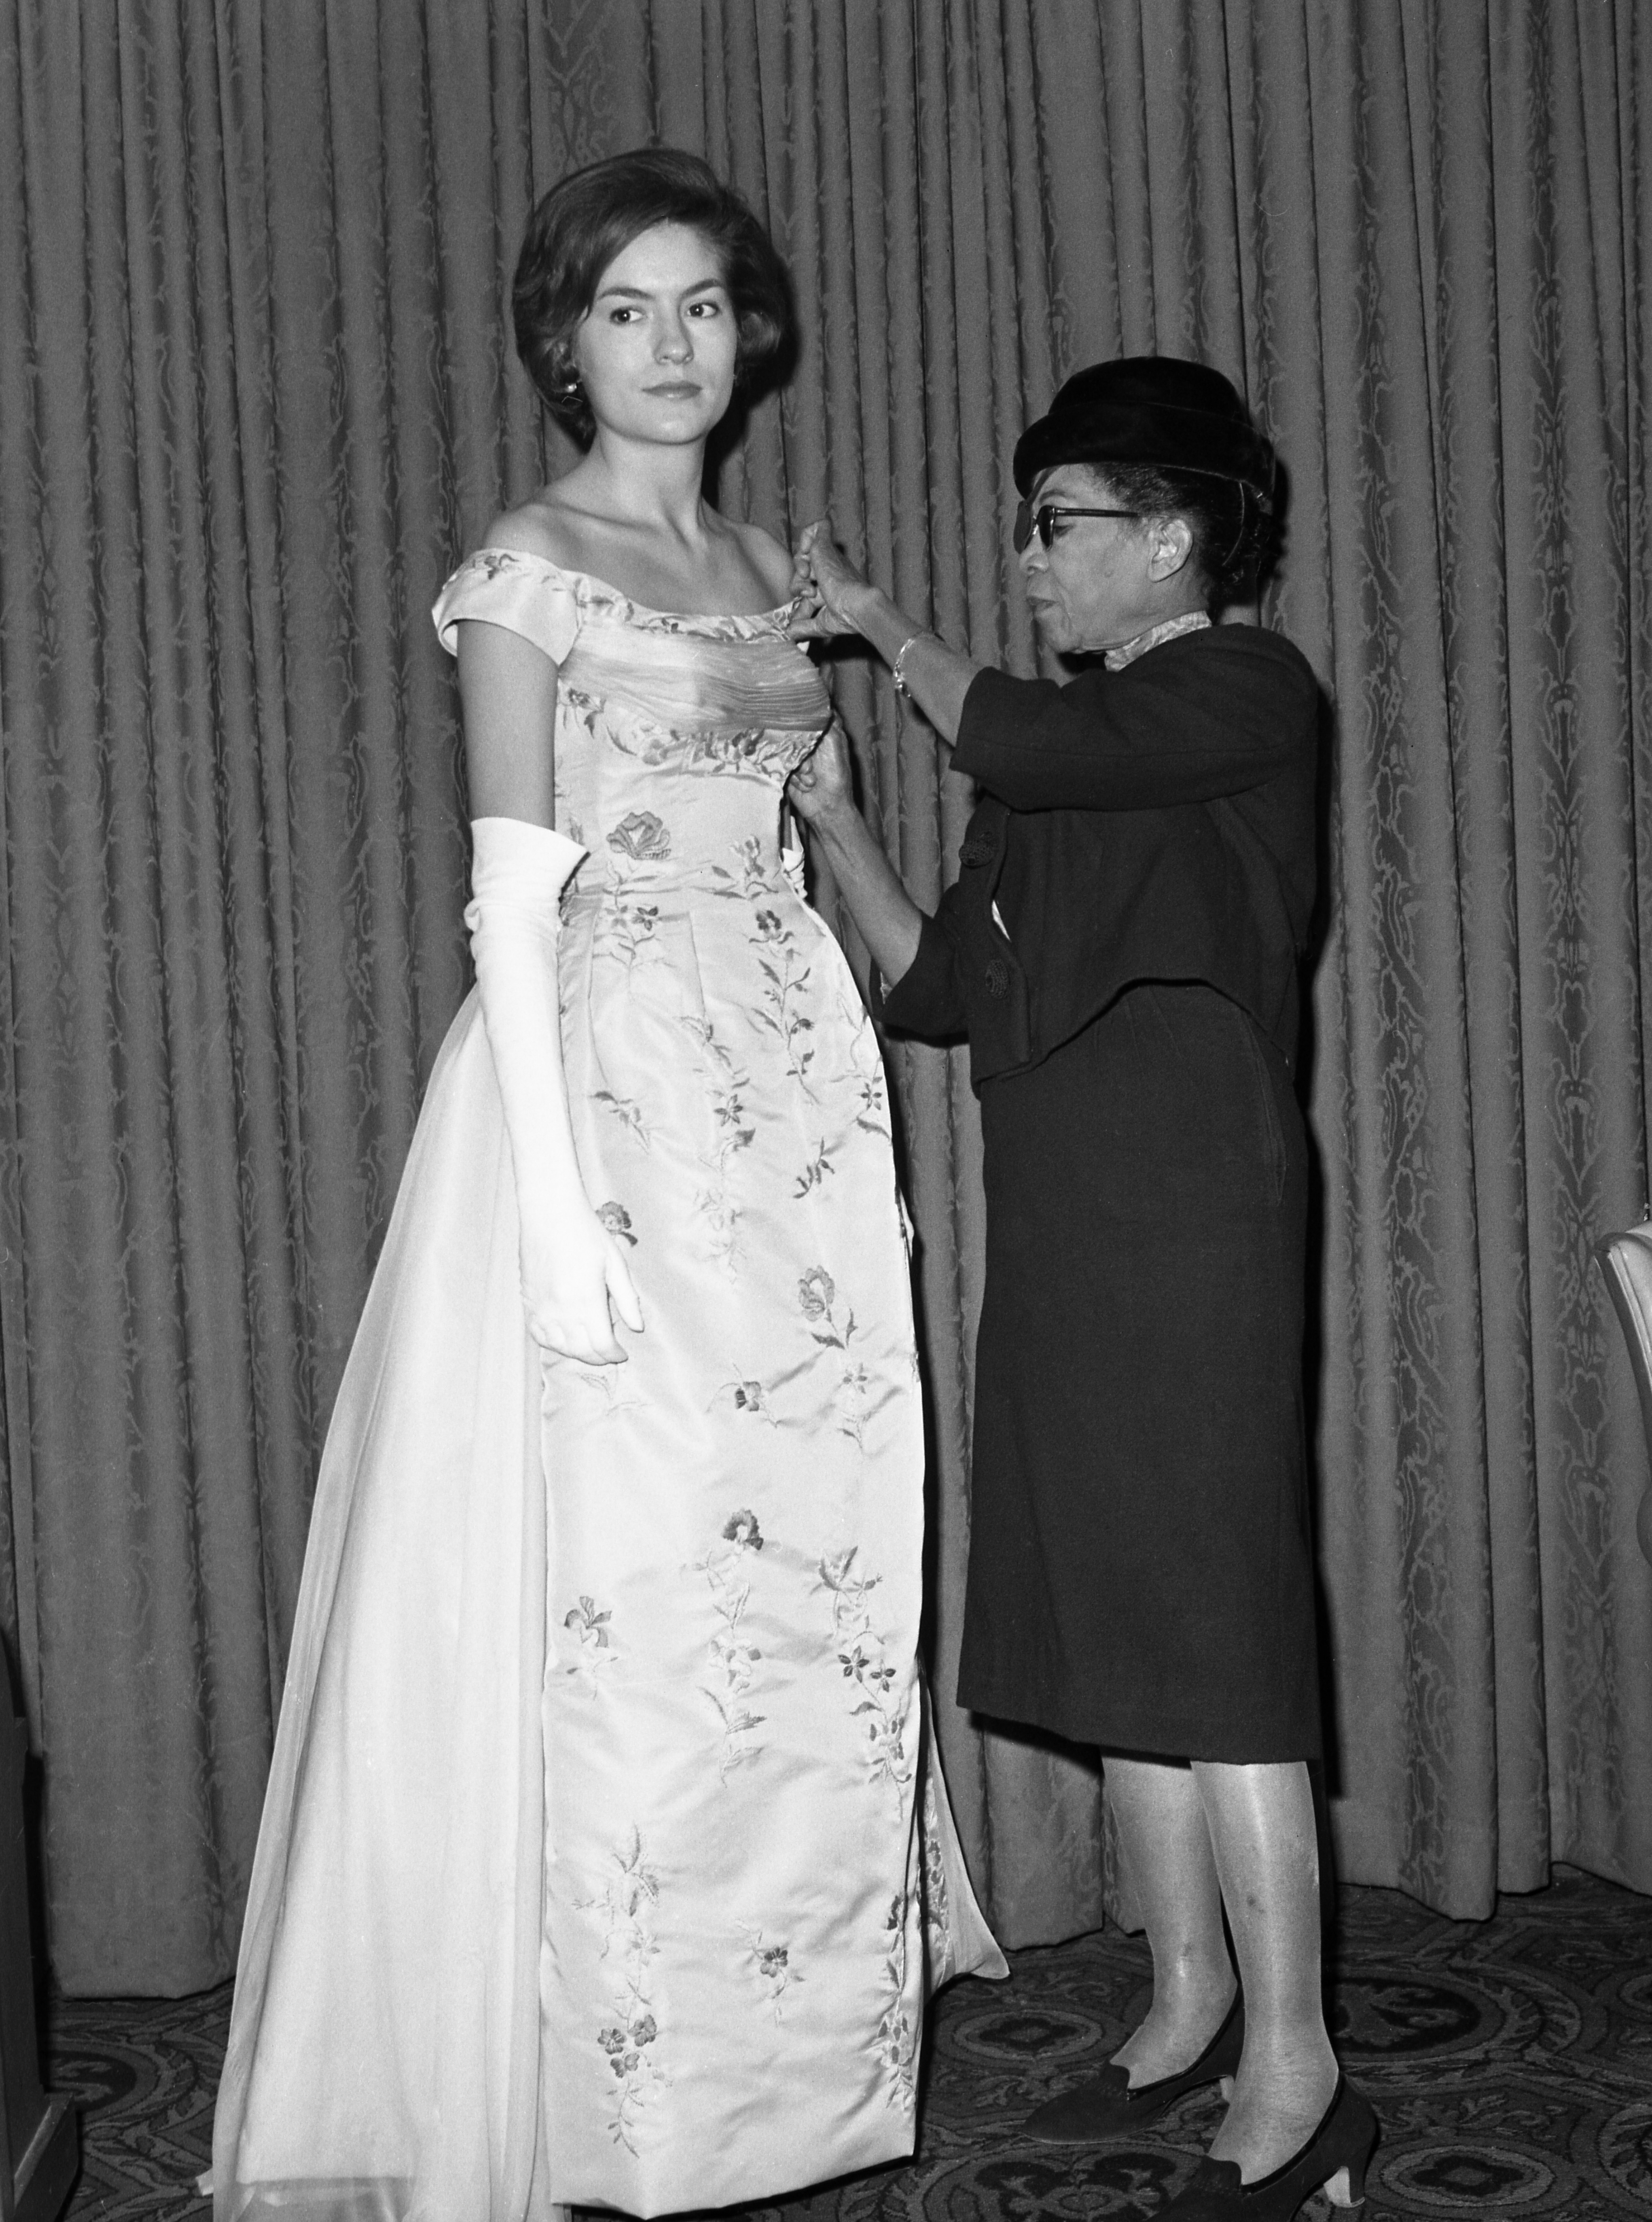 Fashion designer Ann Lowe adjusting the bodice of a client's dress